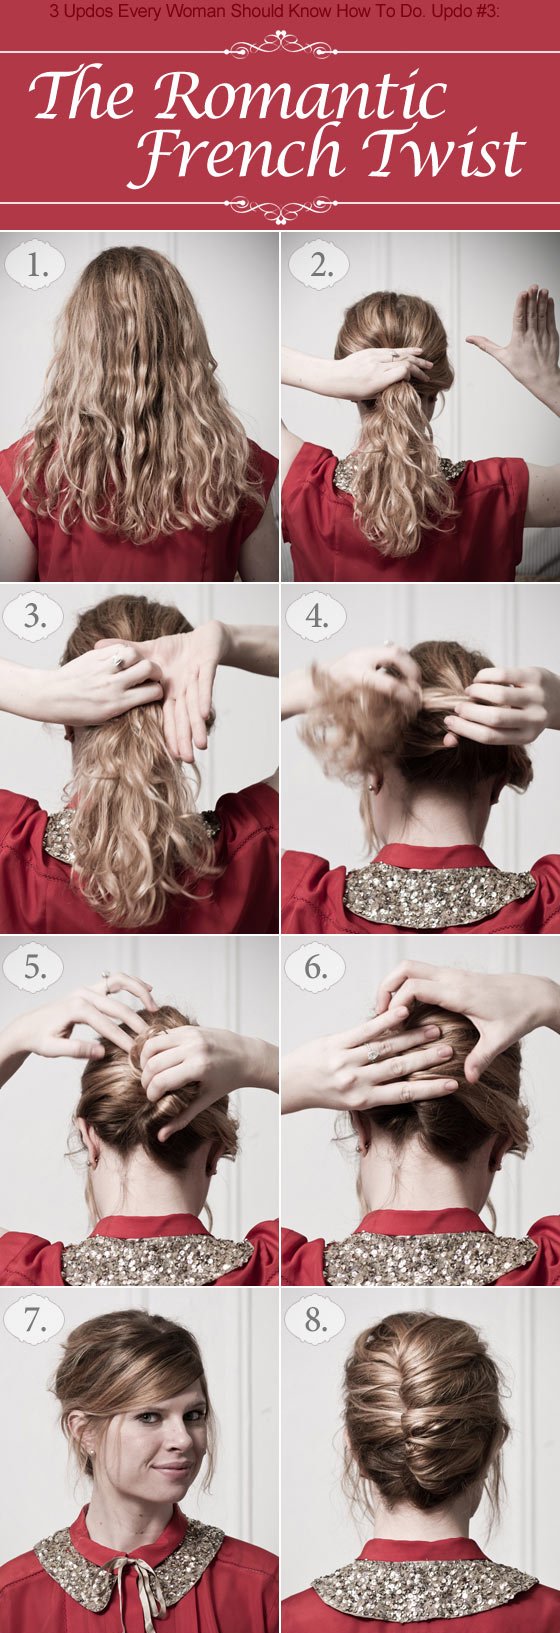 updo-hair-style-20